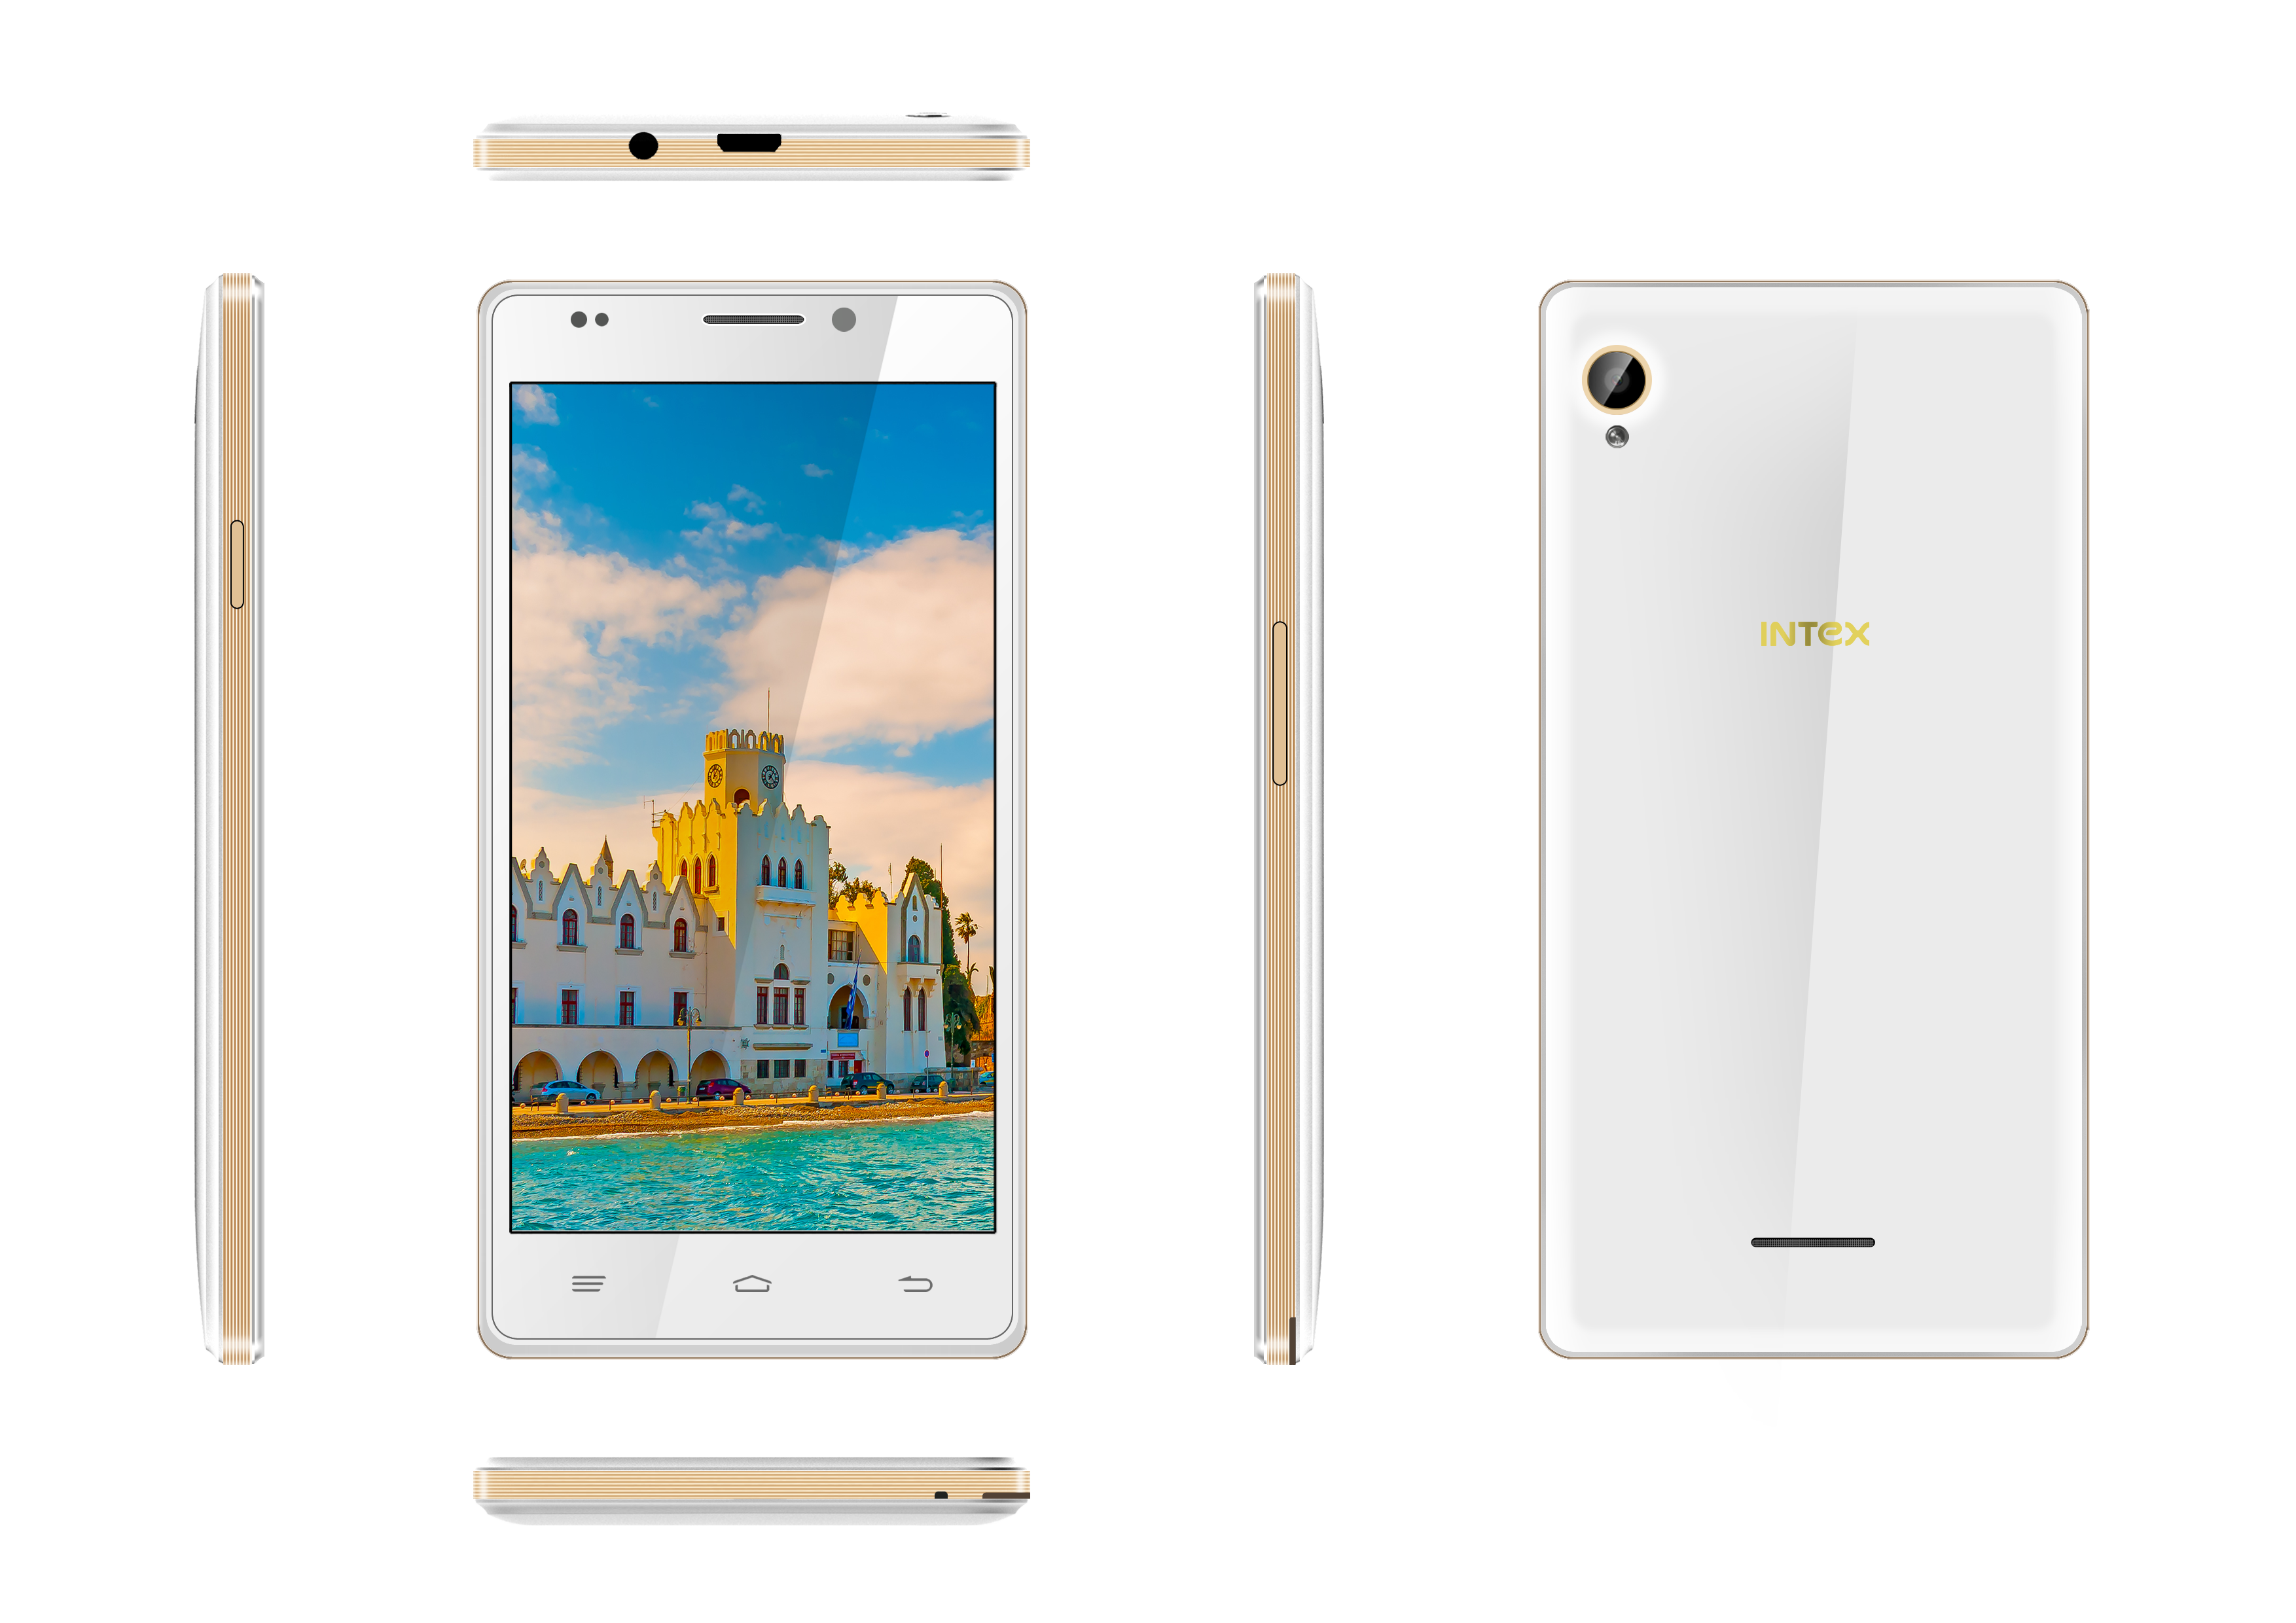 Intex today released its firs